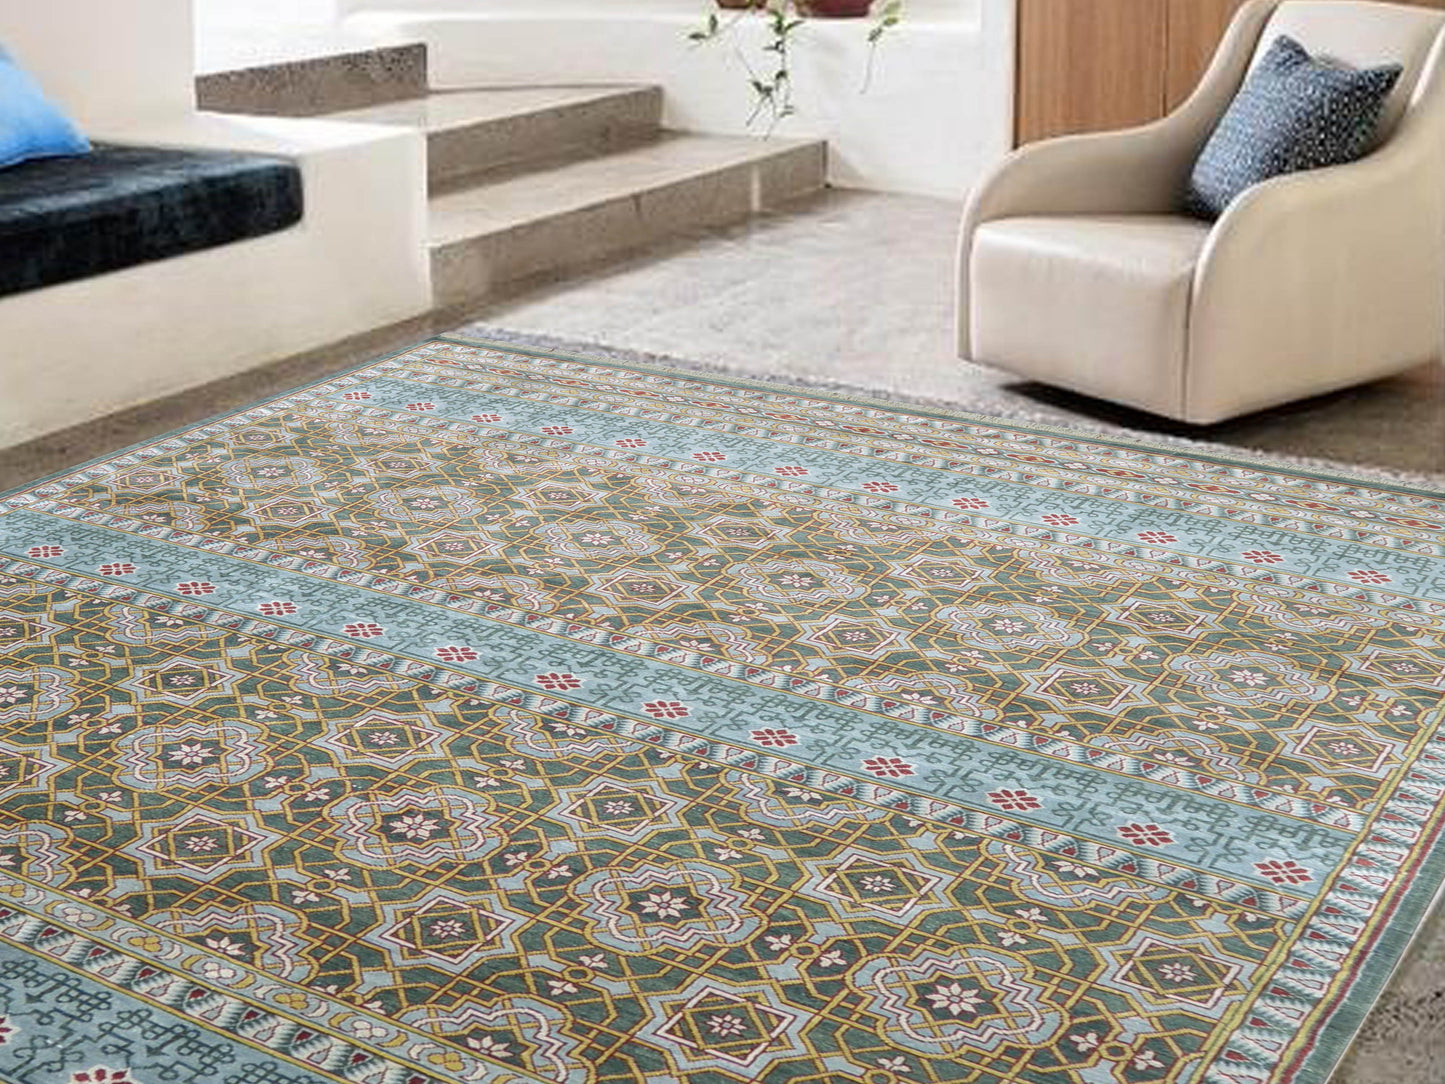 Get trendy with Blue and Multi Pure Silk Geometrical Handknotted Area Rug 7.10x9.11ft 238x302Cms - Traditional Rugs available at Jaipur Oriental Rugs. Grab yours for $5595.00 today!